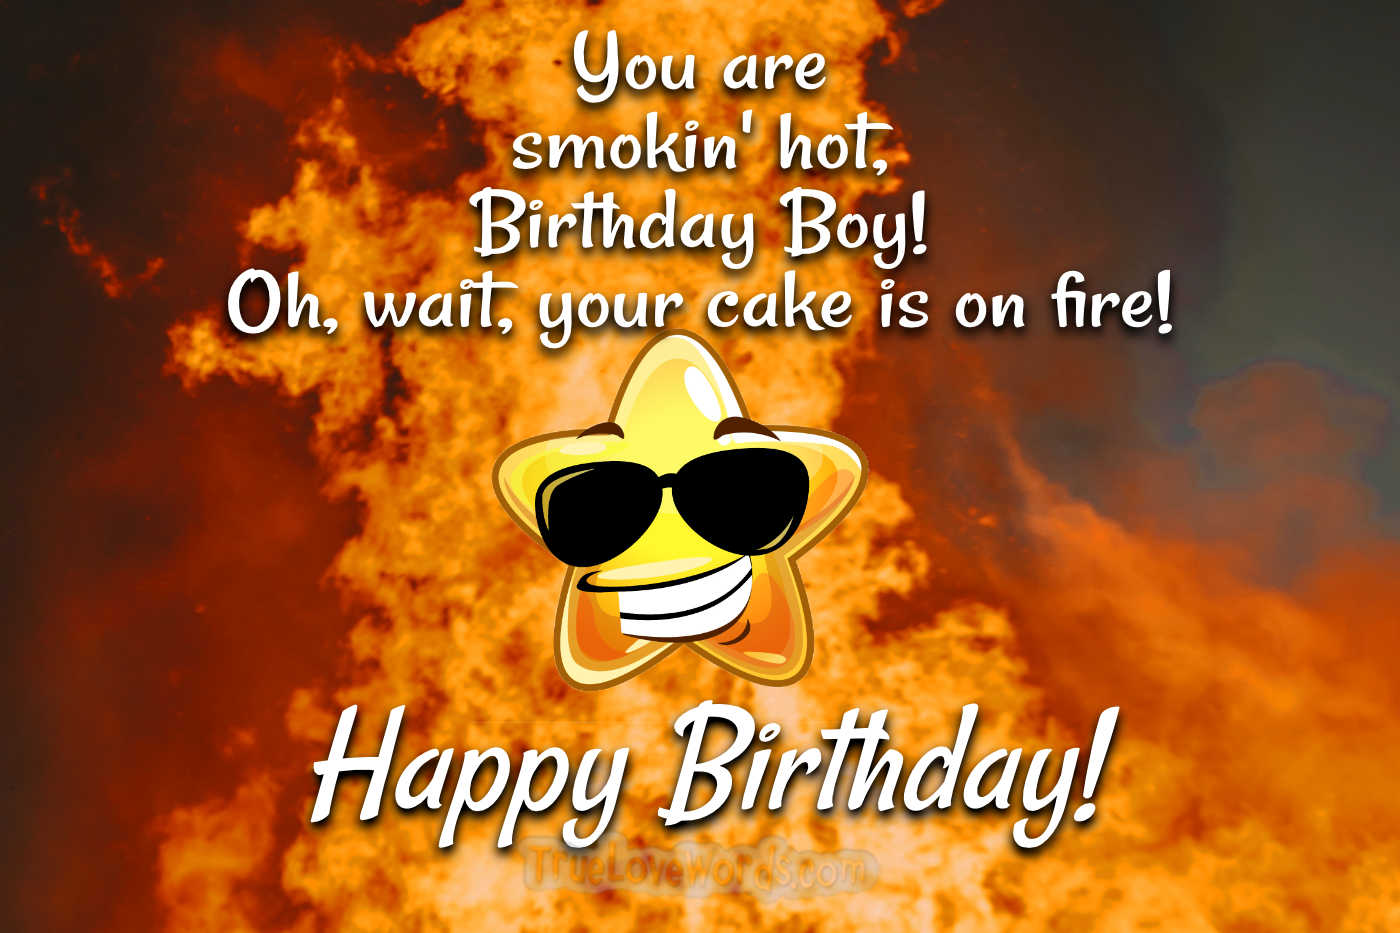 Funny Birthday Wishes And Birthday Memes » True Love Words